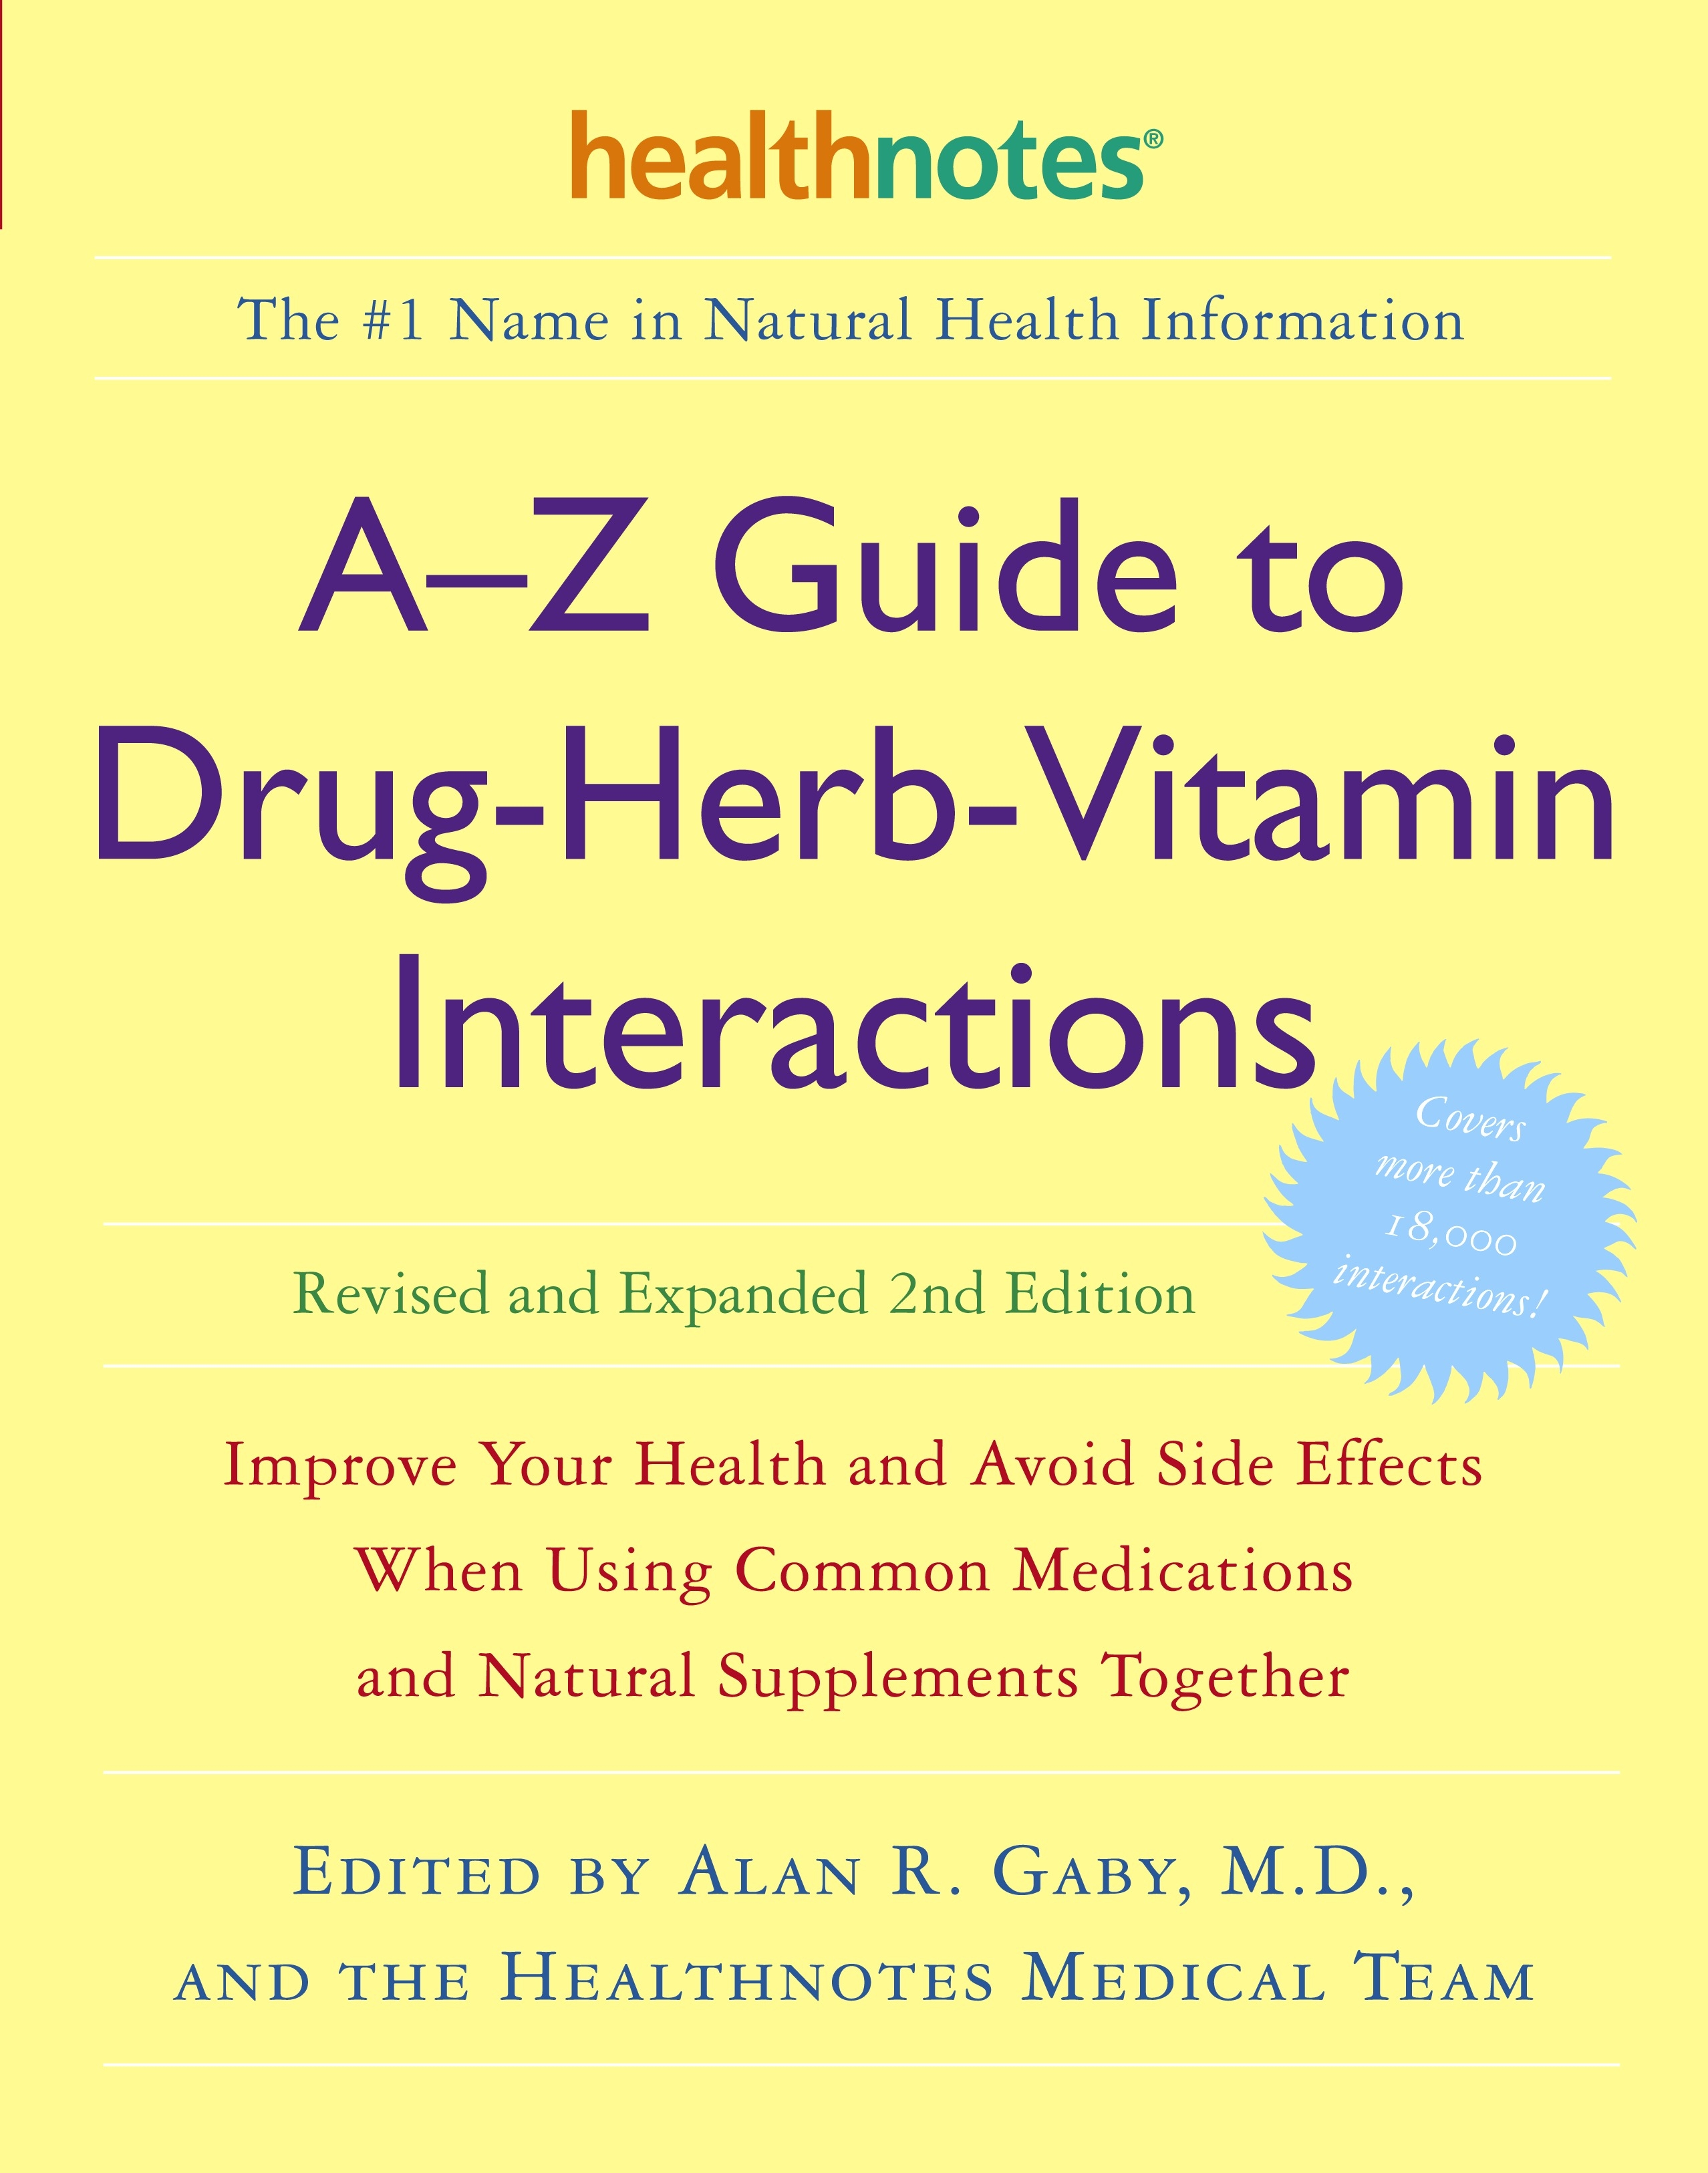 AZ Guide to DrugHerbVitamin Interactions Revised and Expanded 2nd